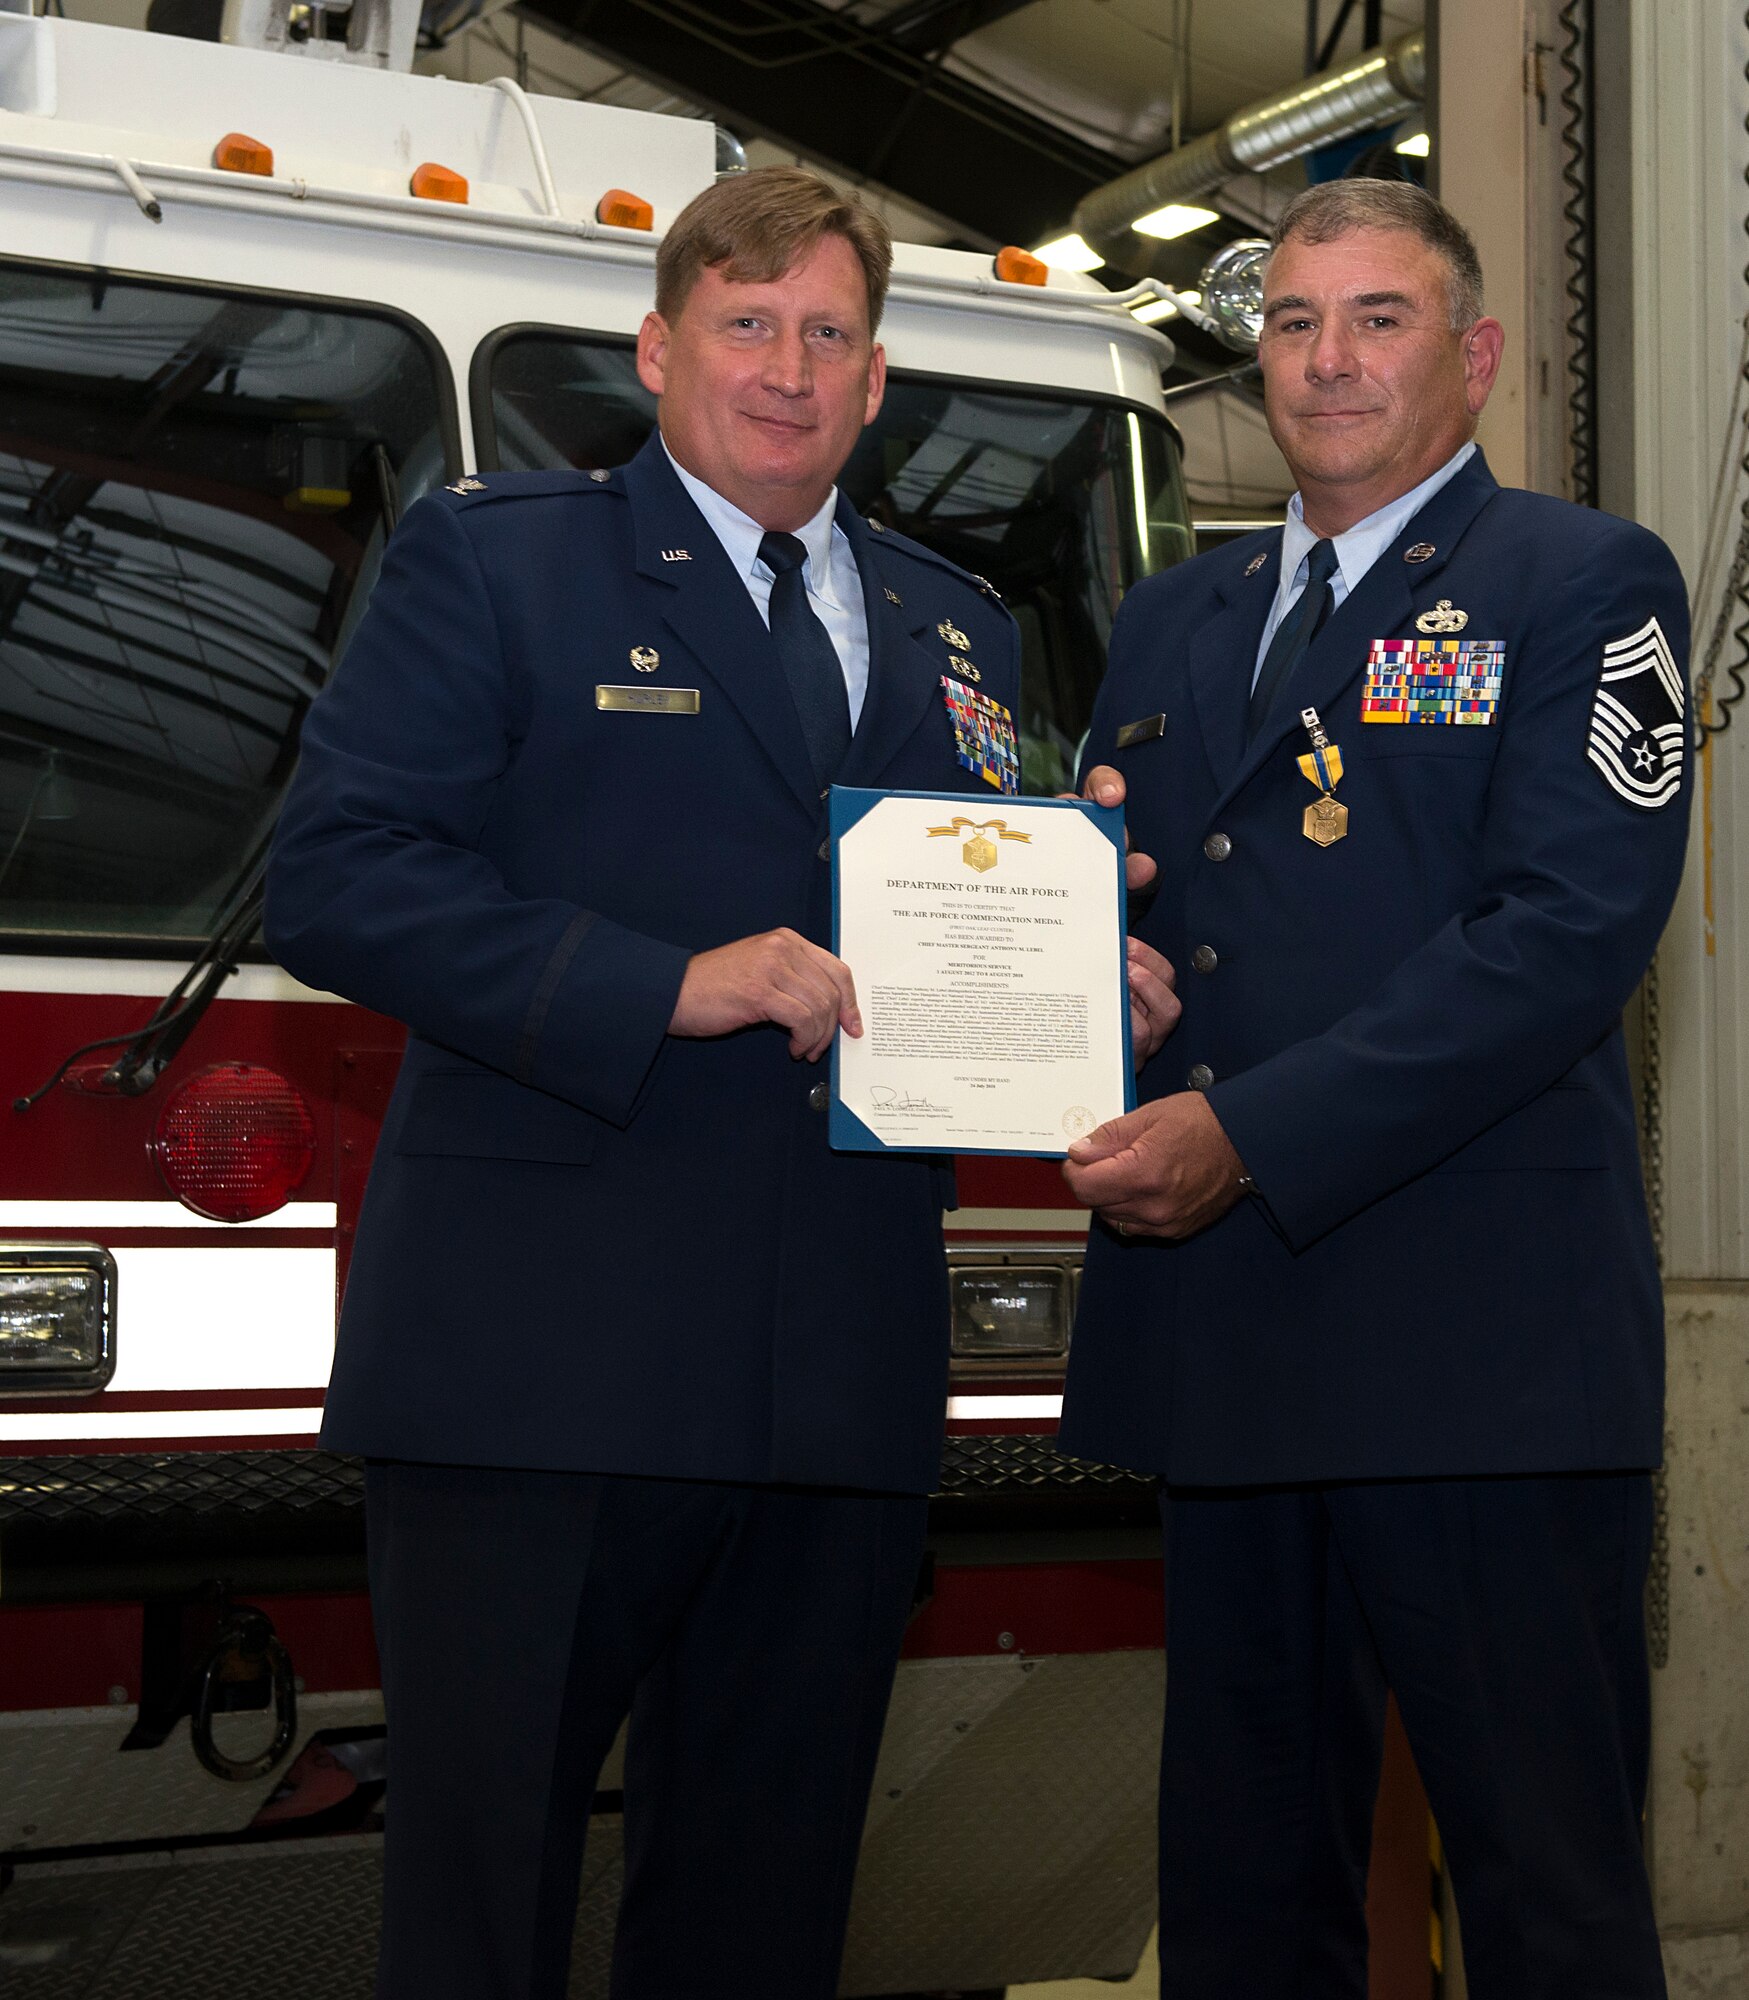 Chief Master Sgt. Anthony M. Lebel, vehicle fleet manager assigned to the 157th Mission Support Group, receives his retirement certificate from Col. Christopher W. Hurley, commander of the 102nd MSG, Vermont Air National Guard, during a ceremony on Aug. 11, 2018 at Pease Air National Guard Base, N.H. Lebel joined the Air Force  in 1983 and retired after more than 35 years of service. (Photo by Staff Sgt. Kayla White, 157th Air Refueling Wing Public Affairs)